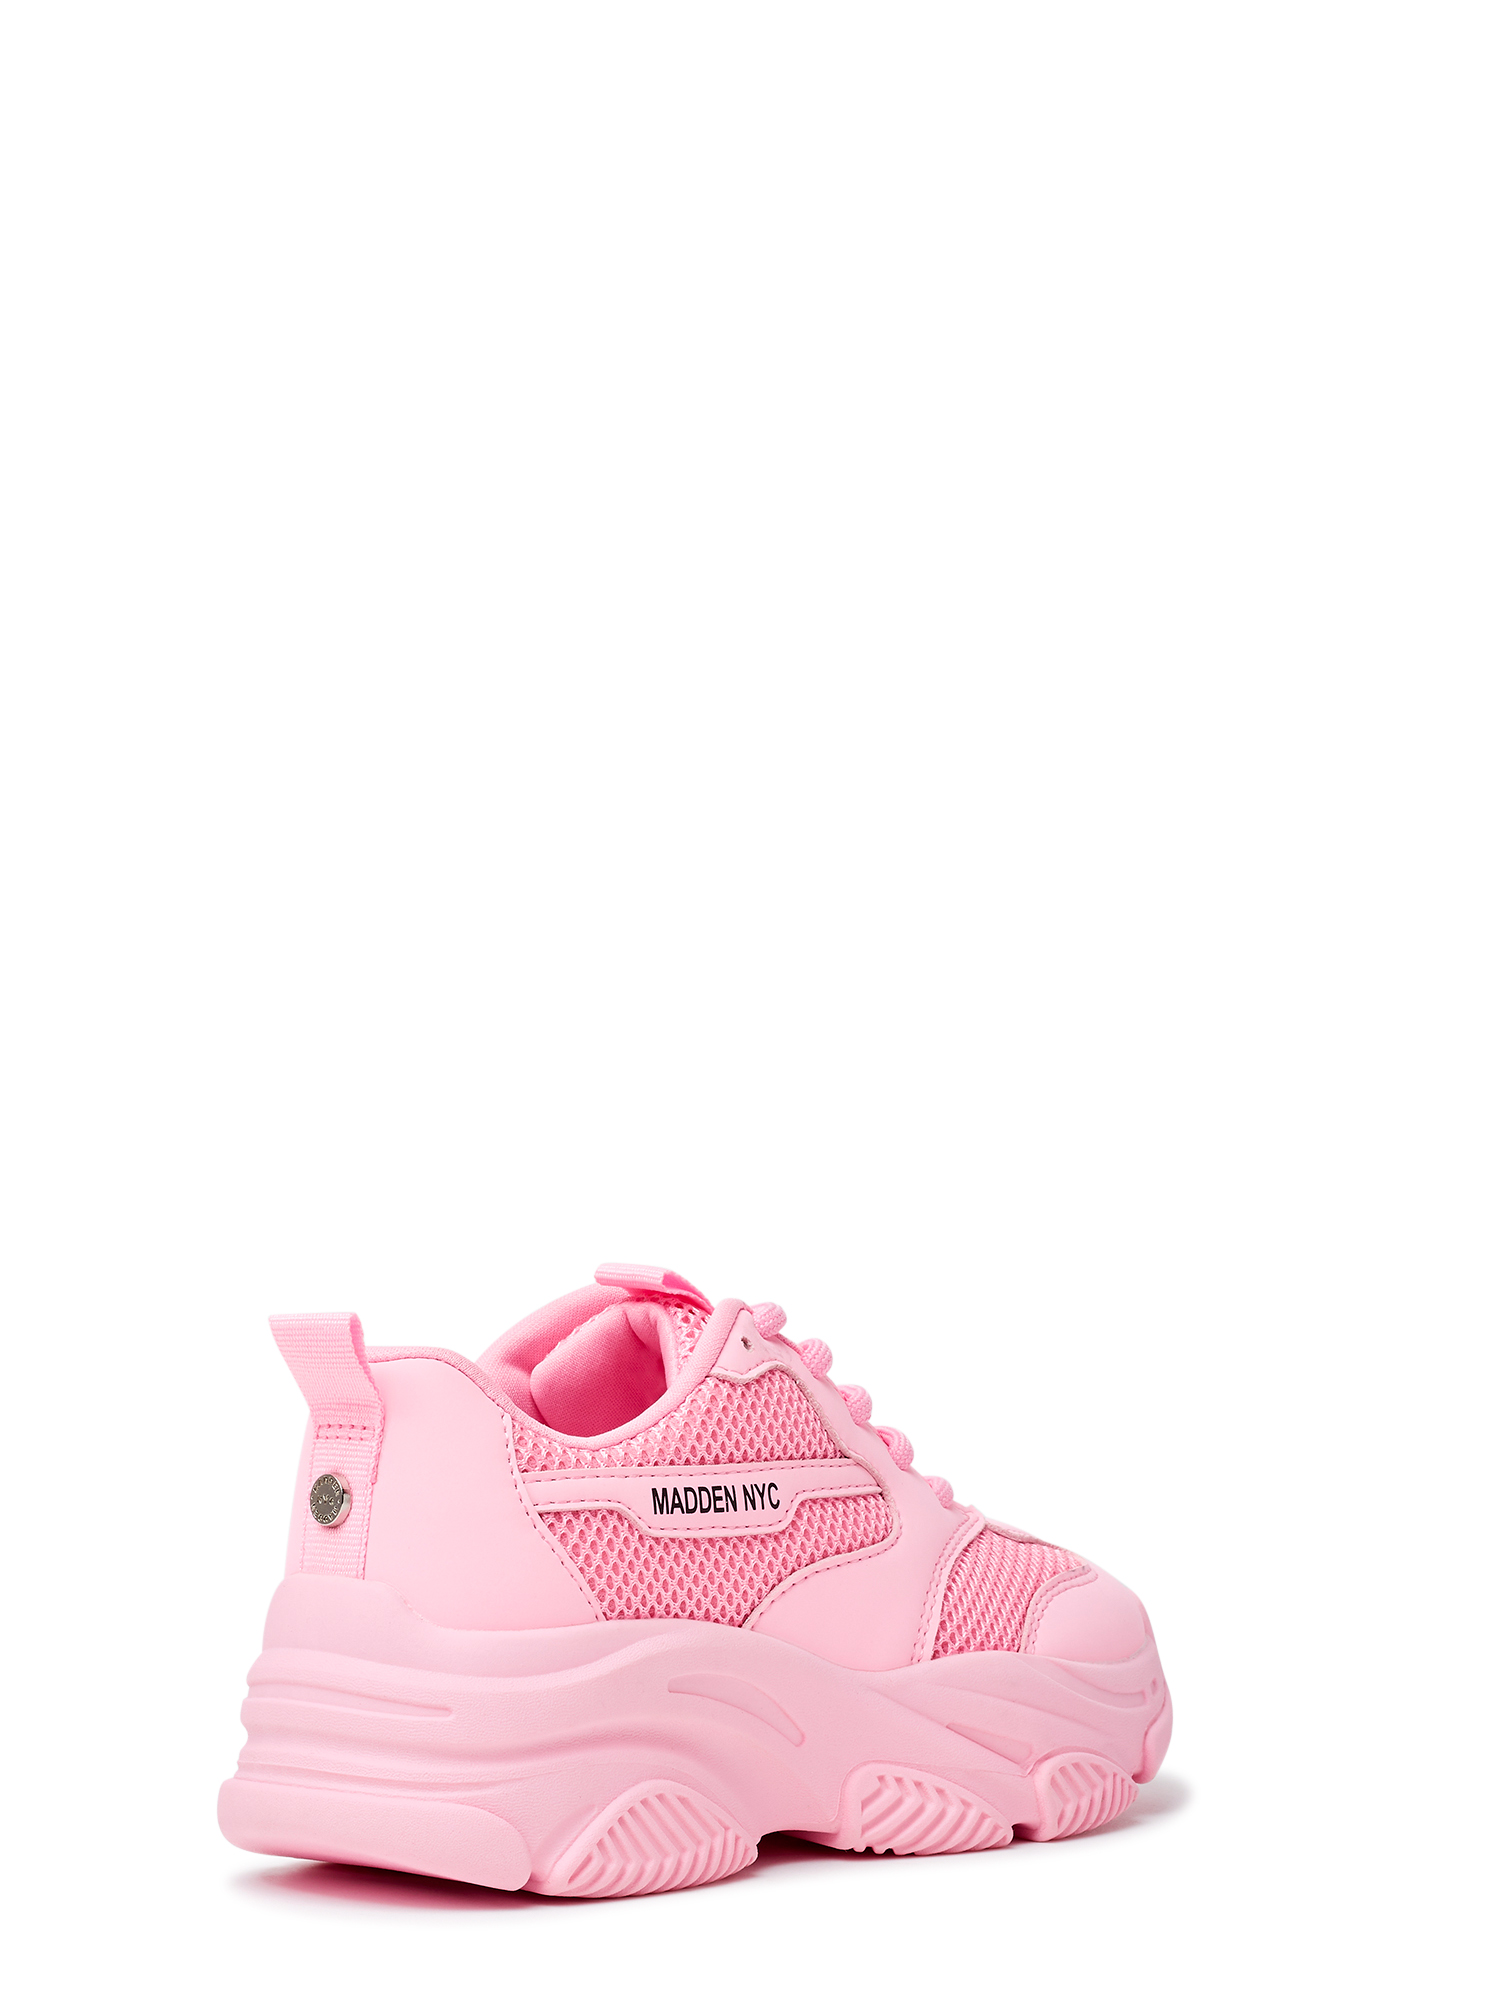 Madden NYC Little Girl & Big Girl Dad Sneaker, Sizes 13-5